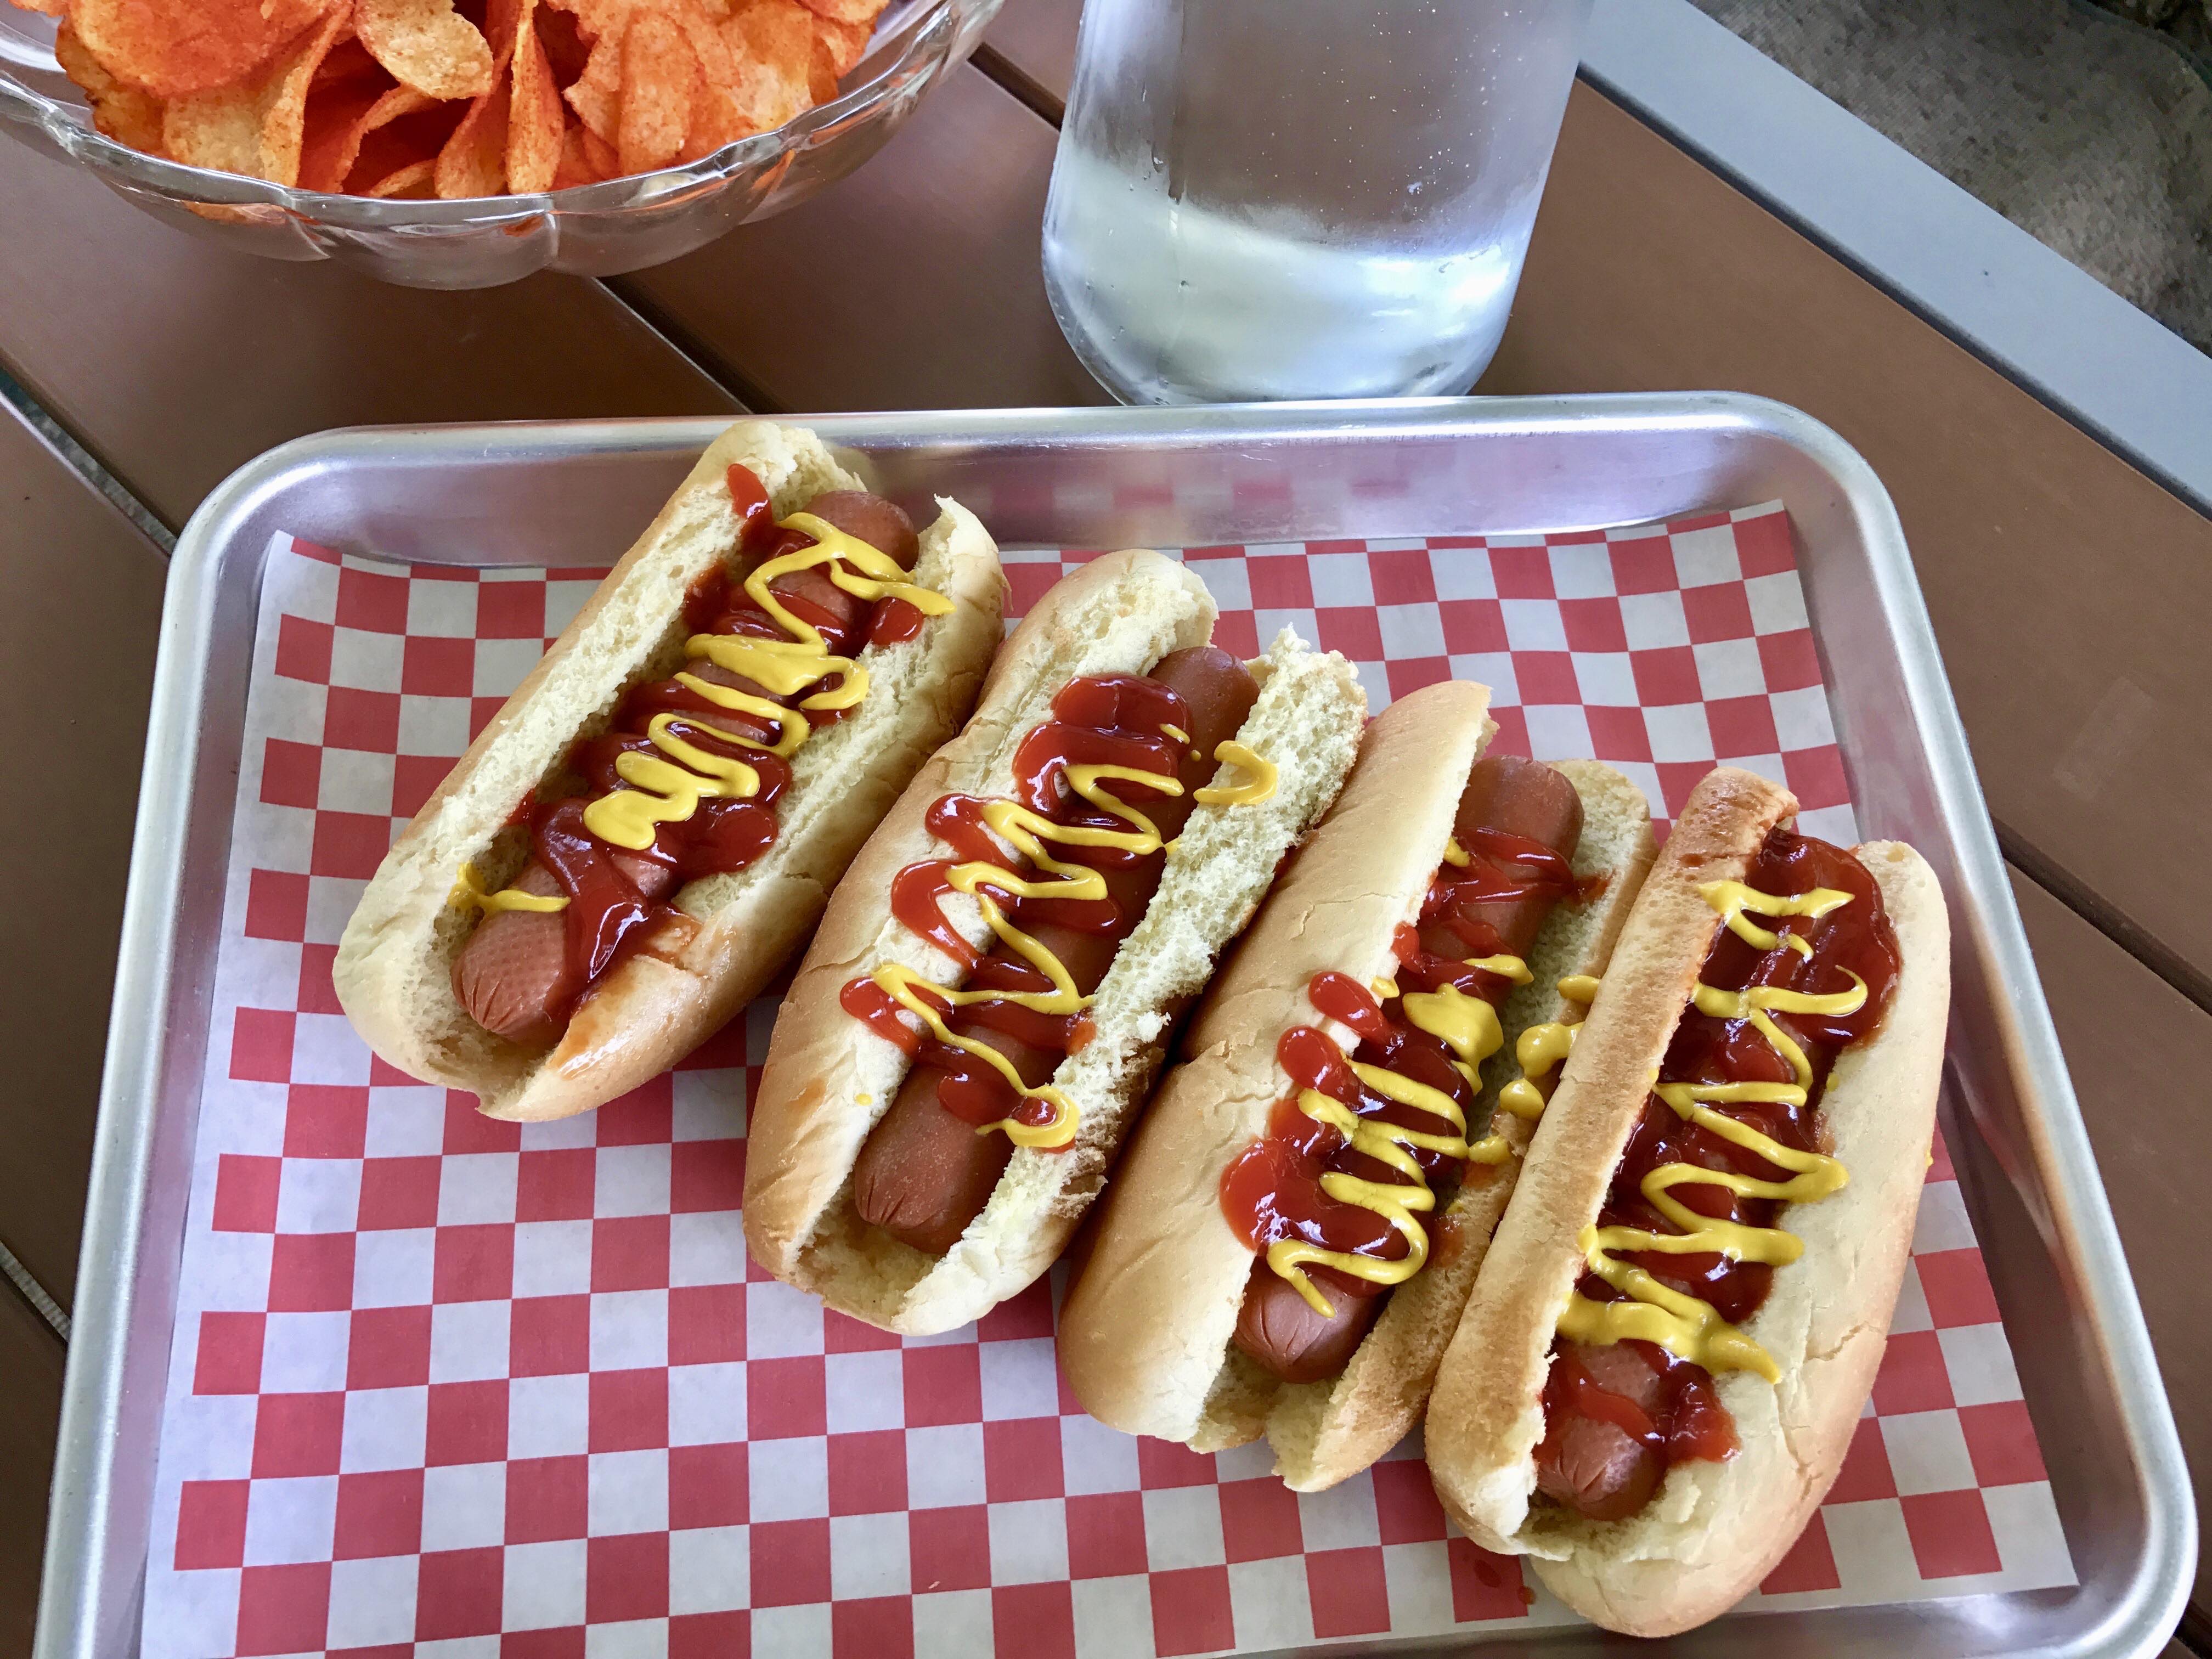 Hot dogs photo